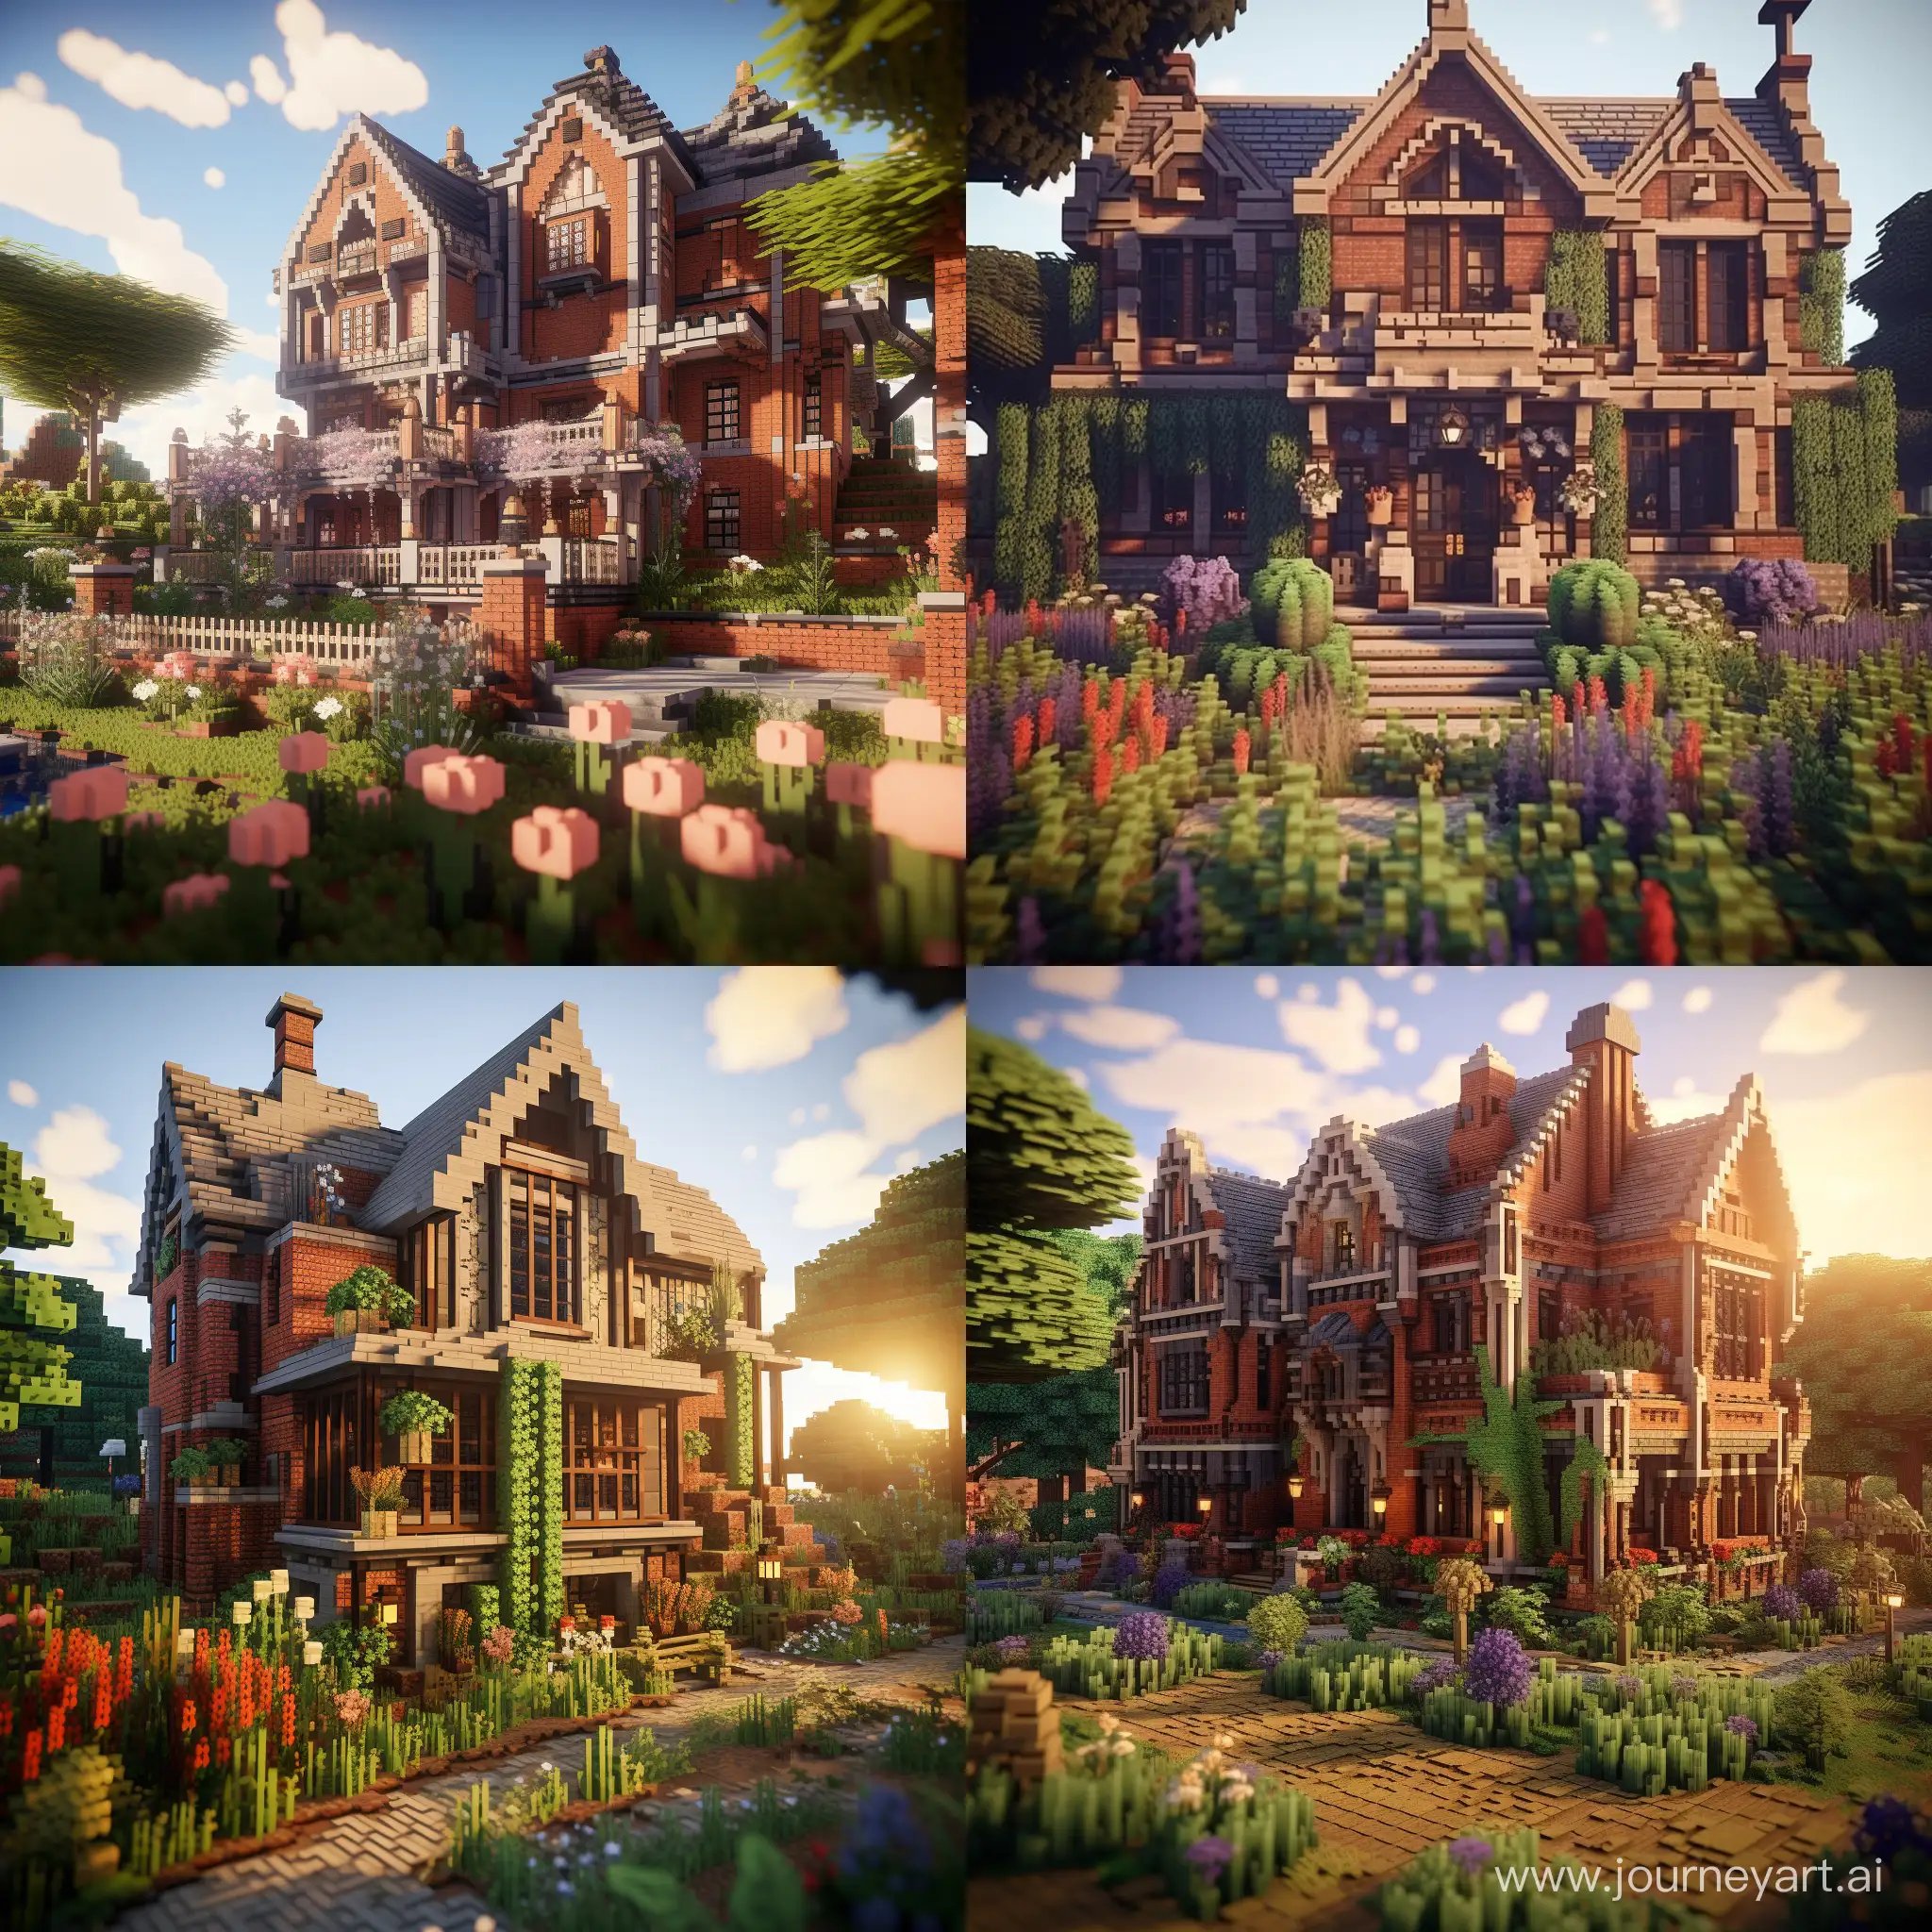 Minecrafty-Victorian-Redbrick-House-with-Garden-on-Small-Hill